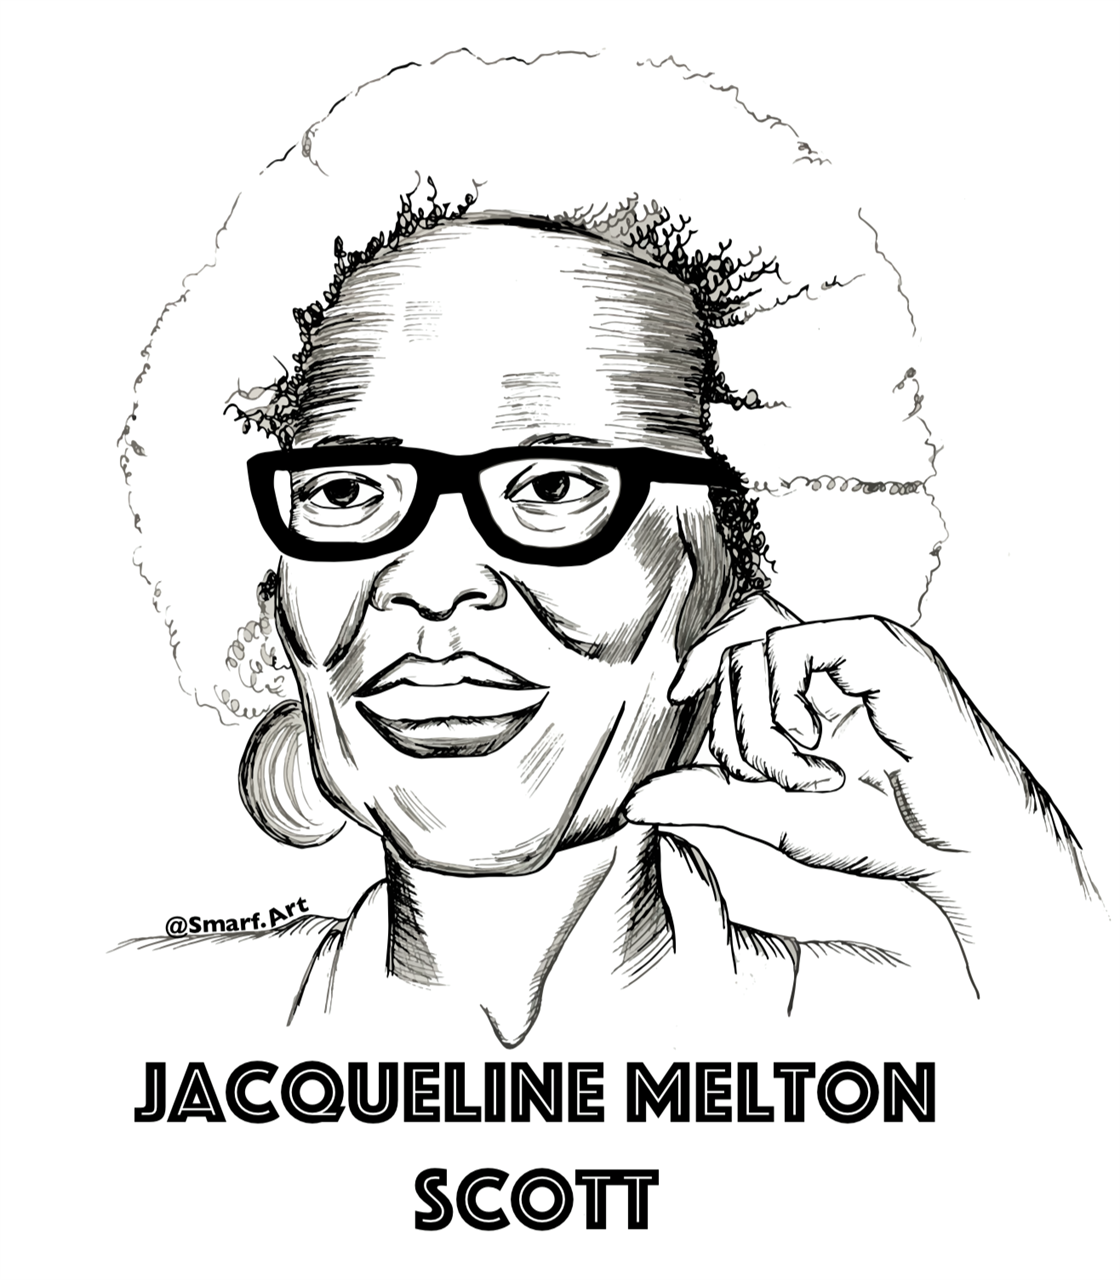 Jacqueline E. Melton Scott (1937-2019) was an activist and educator born and raised in Ithaca, New York. "Mama" Scott was a teacher and family liaison at Beverly J. Martin from 1997-2017. Artwork by Maryam Adib (SmarfArt).  